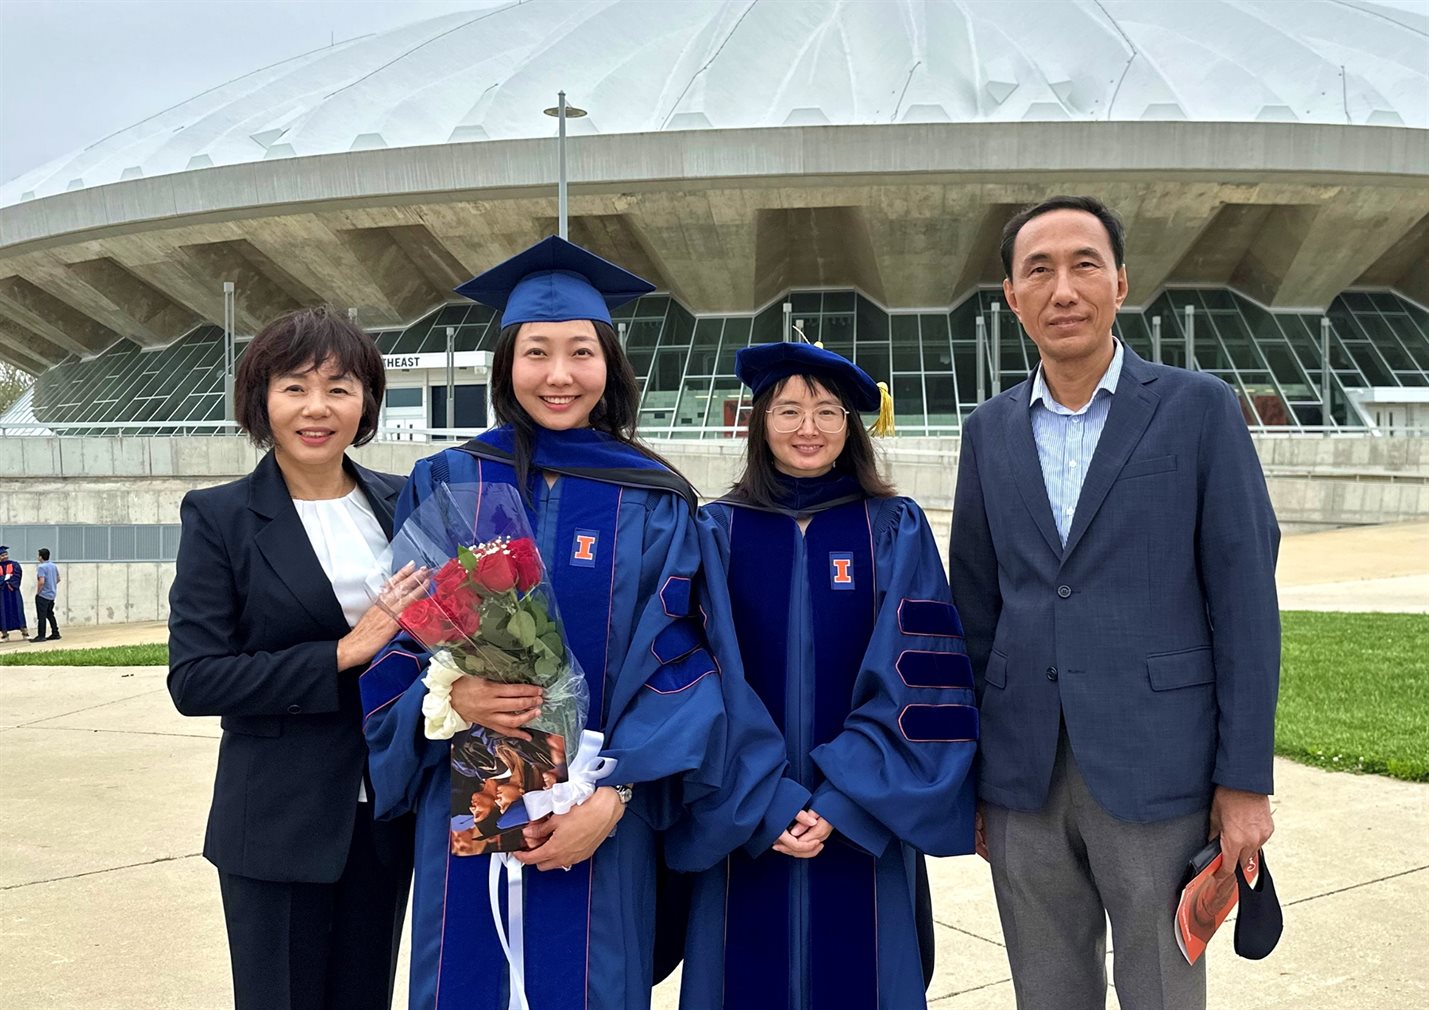 Ahyoung Kim (second from left) poses with her doctoral advisor, associate professor Qian Chen (second from right), and her mom (left) and dad (right).